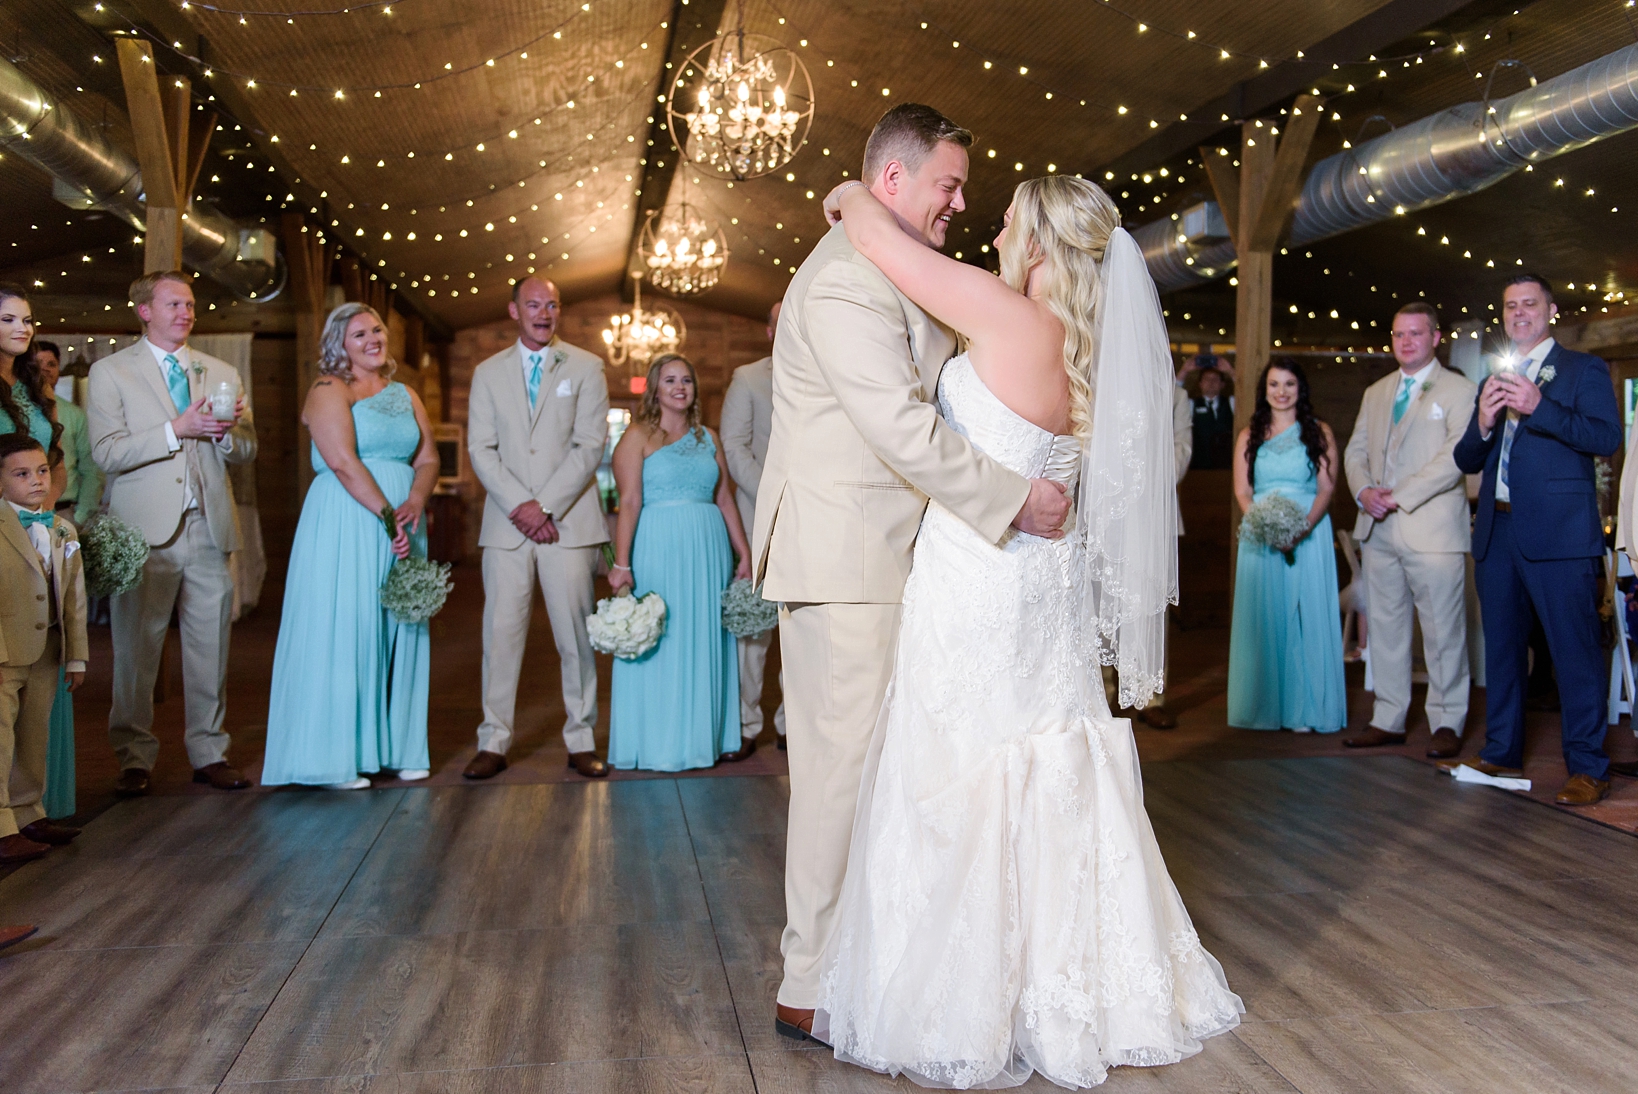 Bride and Groom's first dance in the barn of their Cross Creek Ranch reception